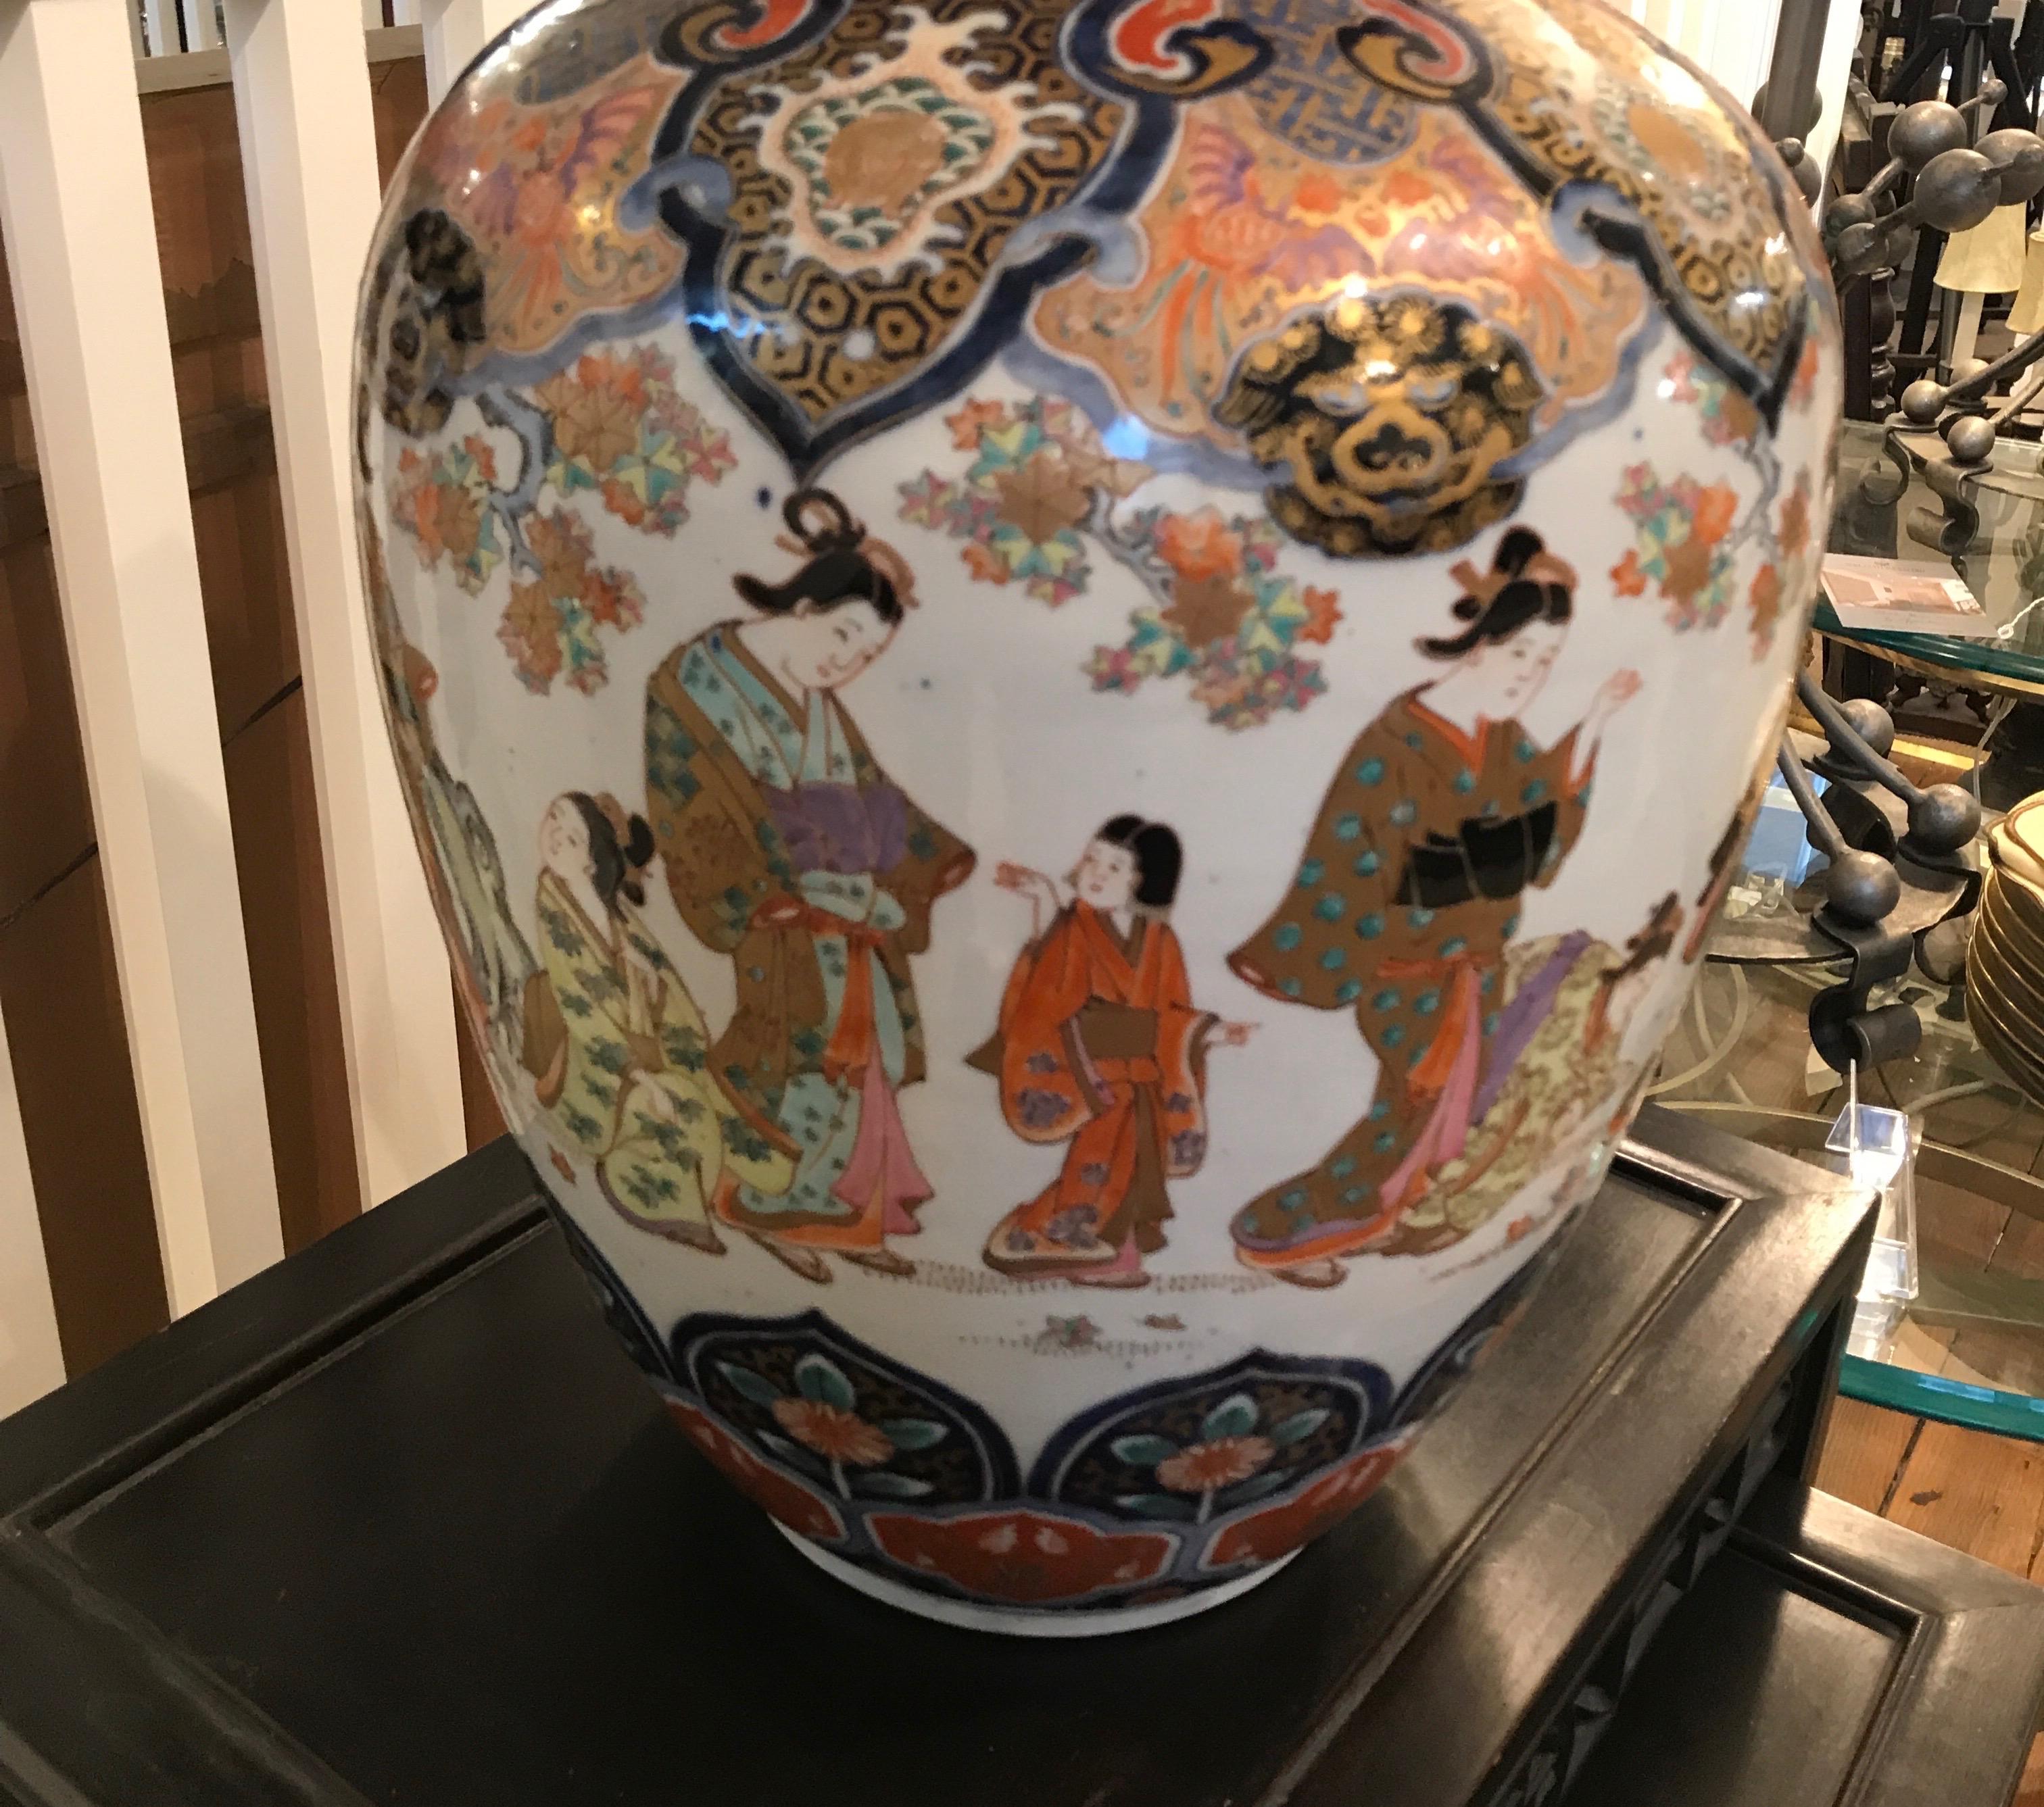 A remarkable hand painted Japanese porcelain Imari vase. Classic iron red and cobalt blue on a white porcelain background. Elegant Japanese figures painted all around the center portion with intricate detailed top and bottom with gilt highlights.